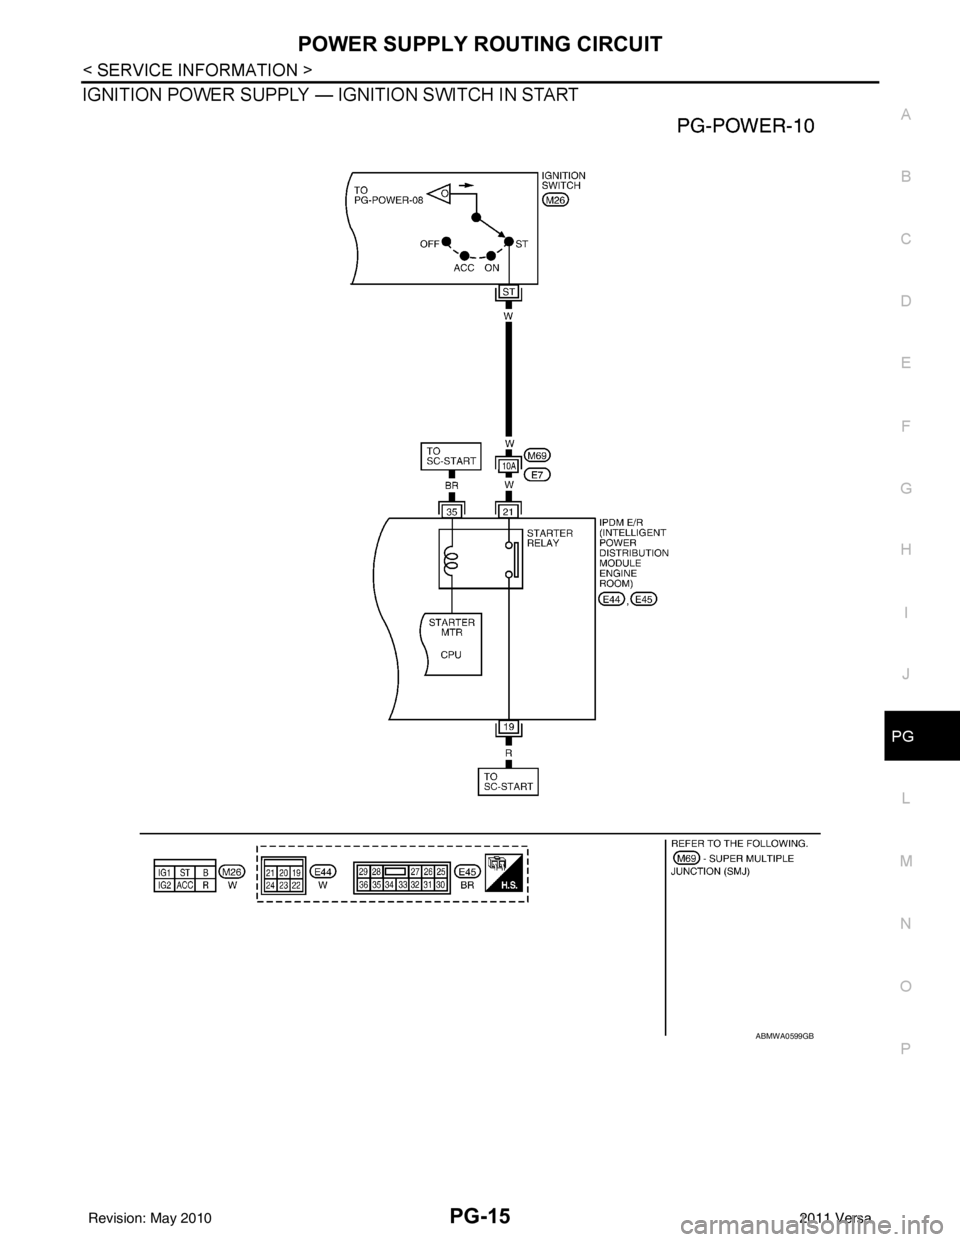 NISSAN LATIO 2011  Service Repair Manual POWER SUPPLY ROUTING CIRCUITPG-15
< SERVICE INFORMATION >
C
DE
F
G H
I
J
L
M A
B
PG
N
O P
IGNITION POWER SUPPLY — IGNITION SWITCH IN START 
ABMWA0599GB
Revision: May 2010 2011 Versa 